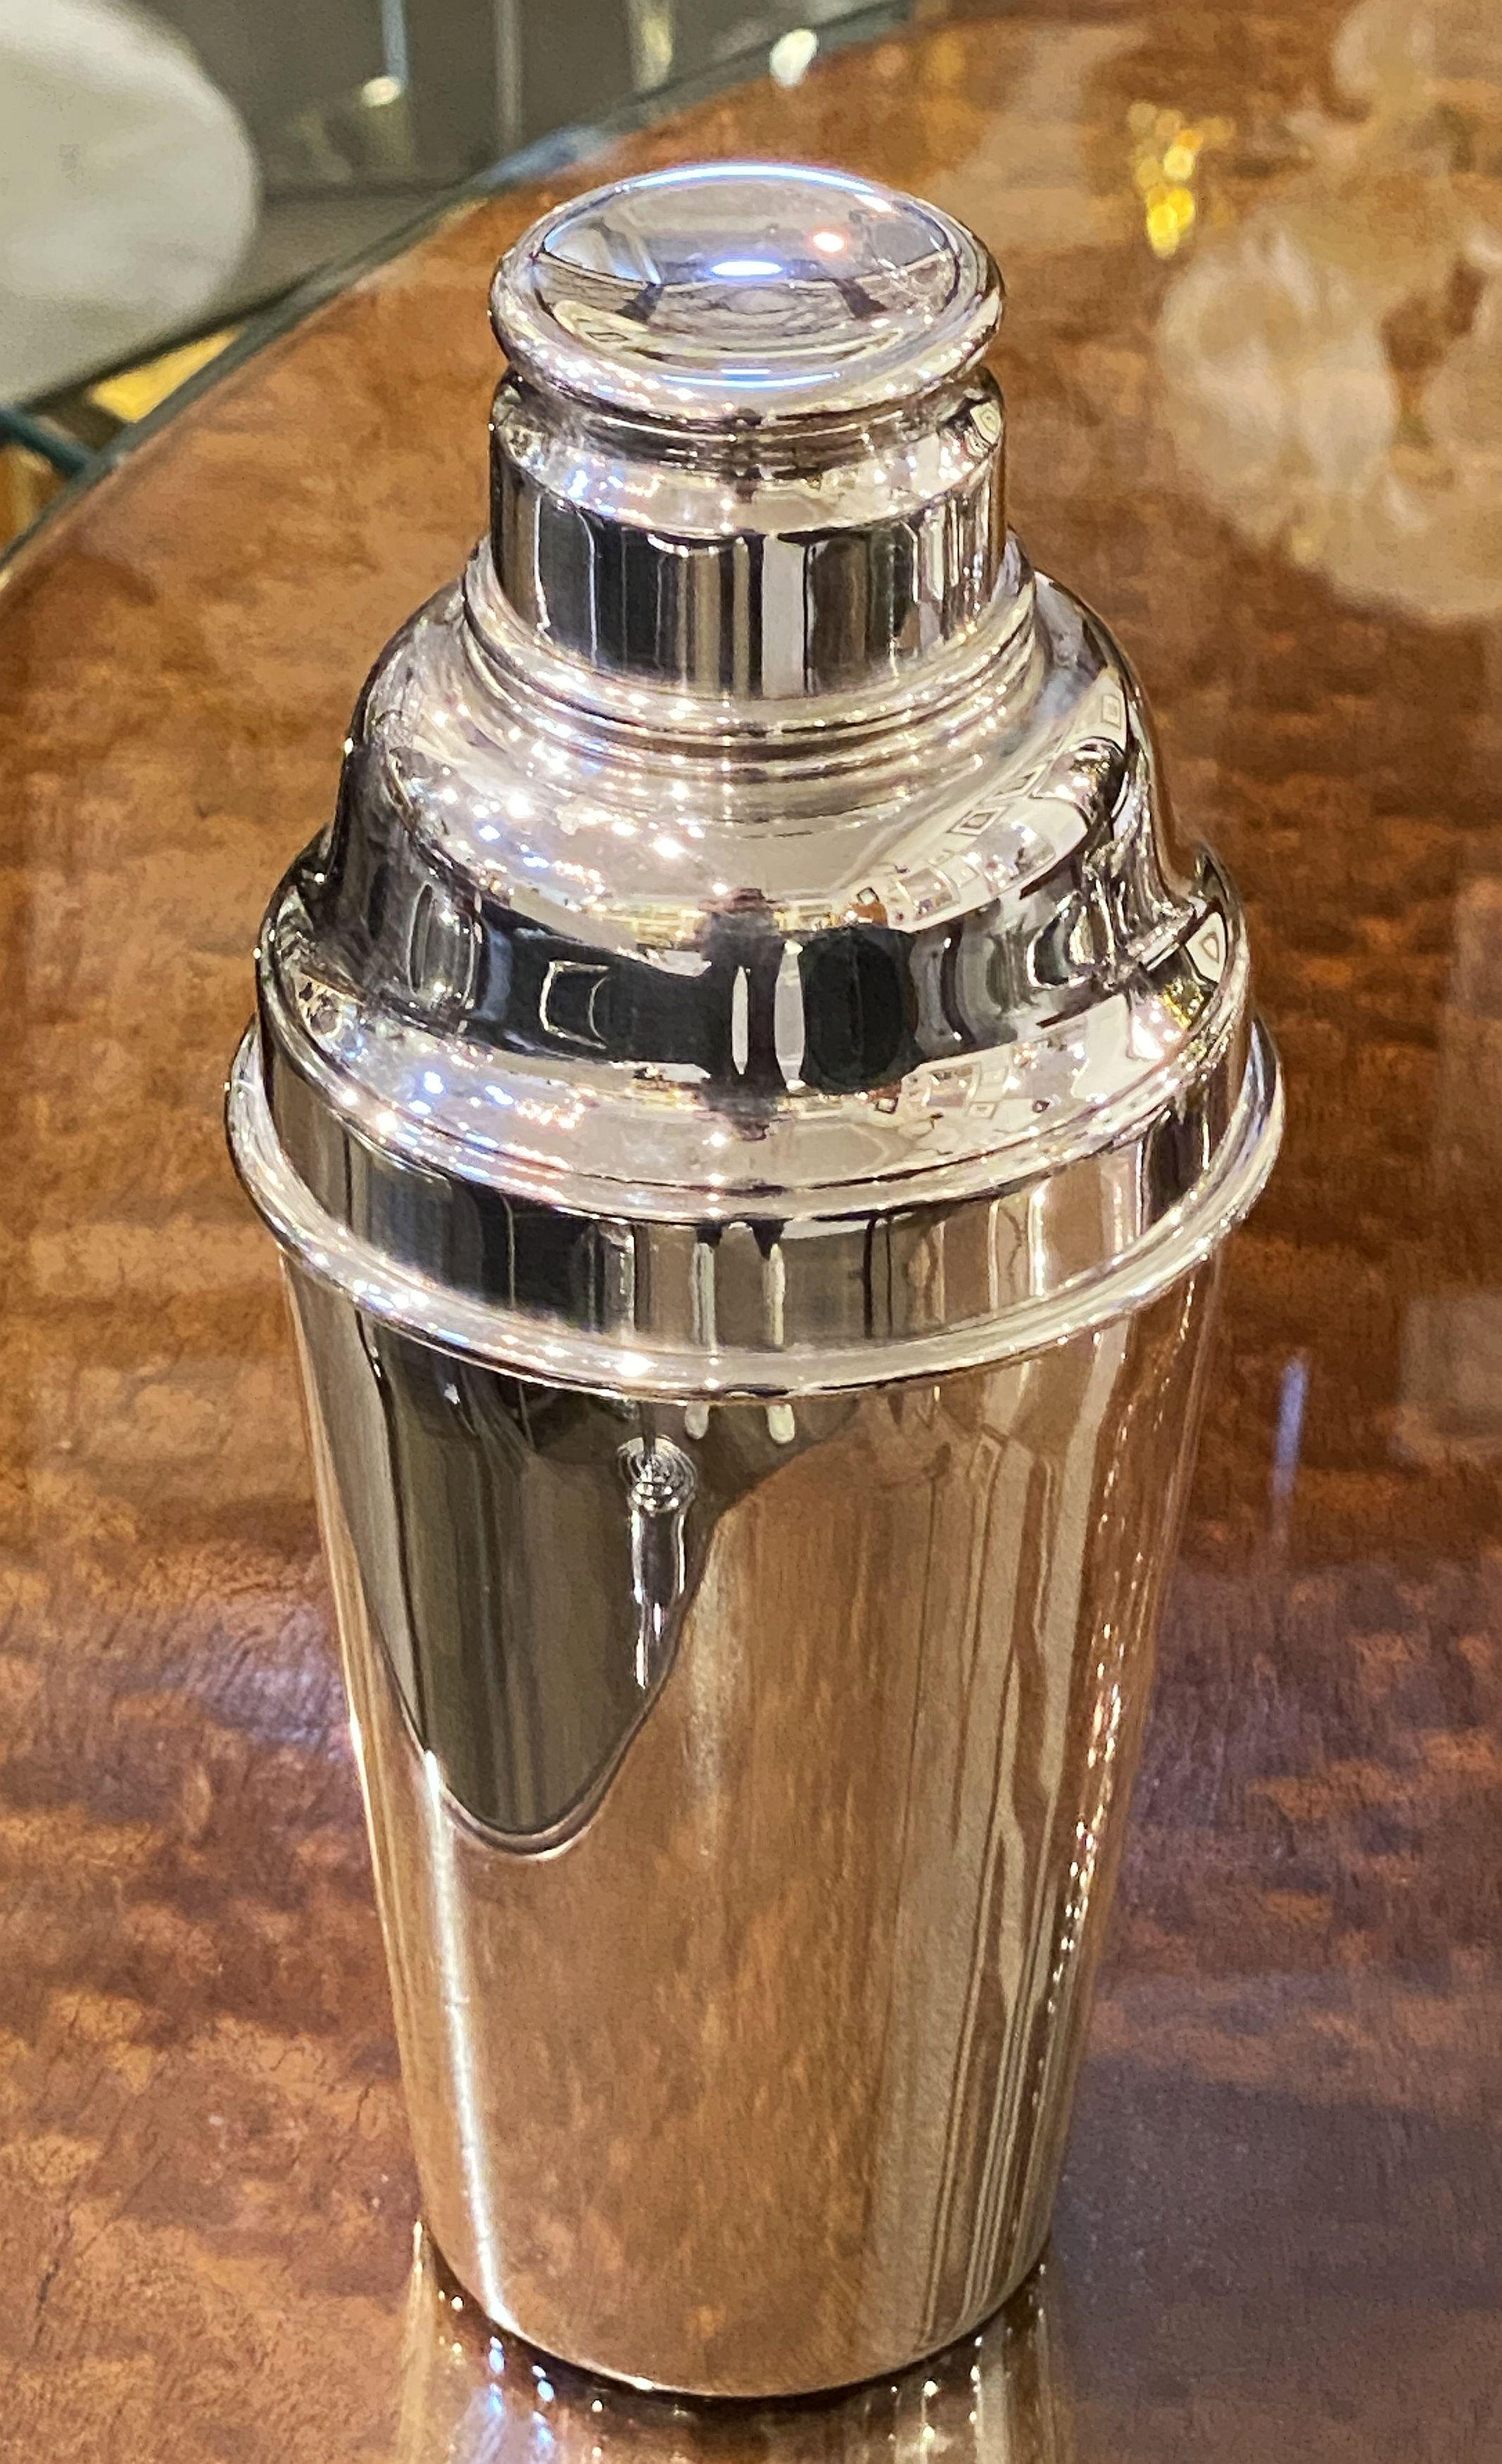 A vintage English cylindrical martini or cocktail shaker of fine plate silver from the Art Deco period, by Angora Silver Plate & Co., with engine-turned removable cap and strainer.

Marked on base: Angora - EPNS - Made in England

Perfect for